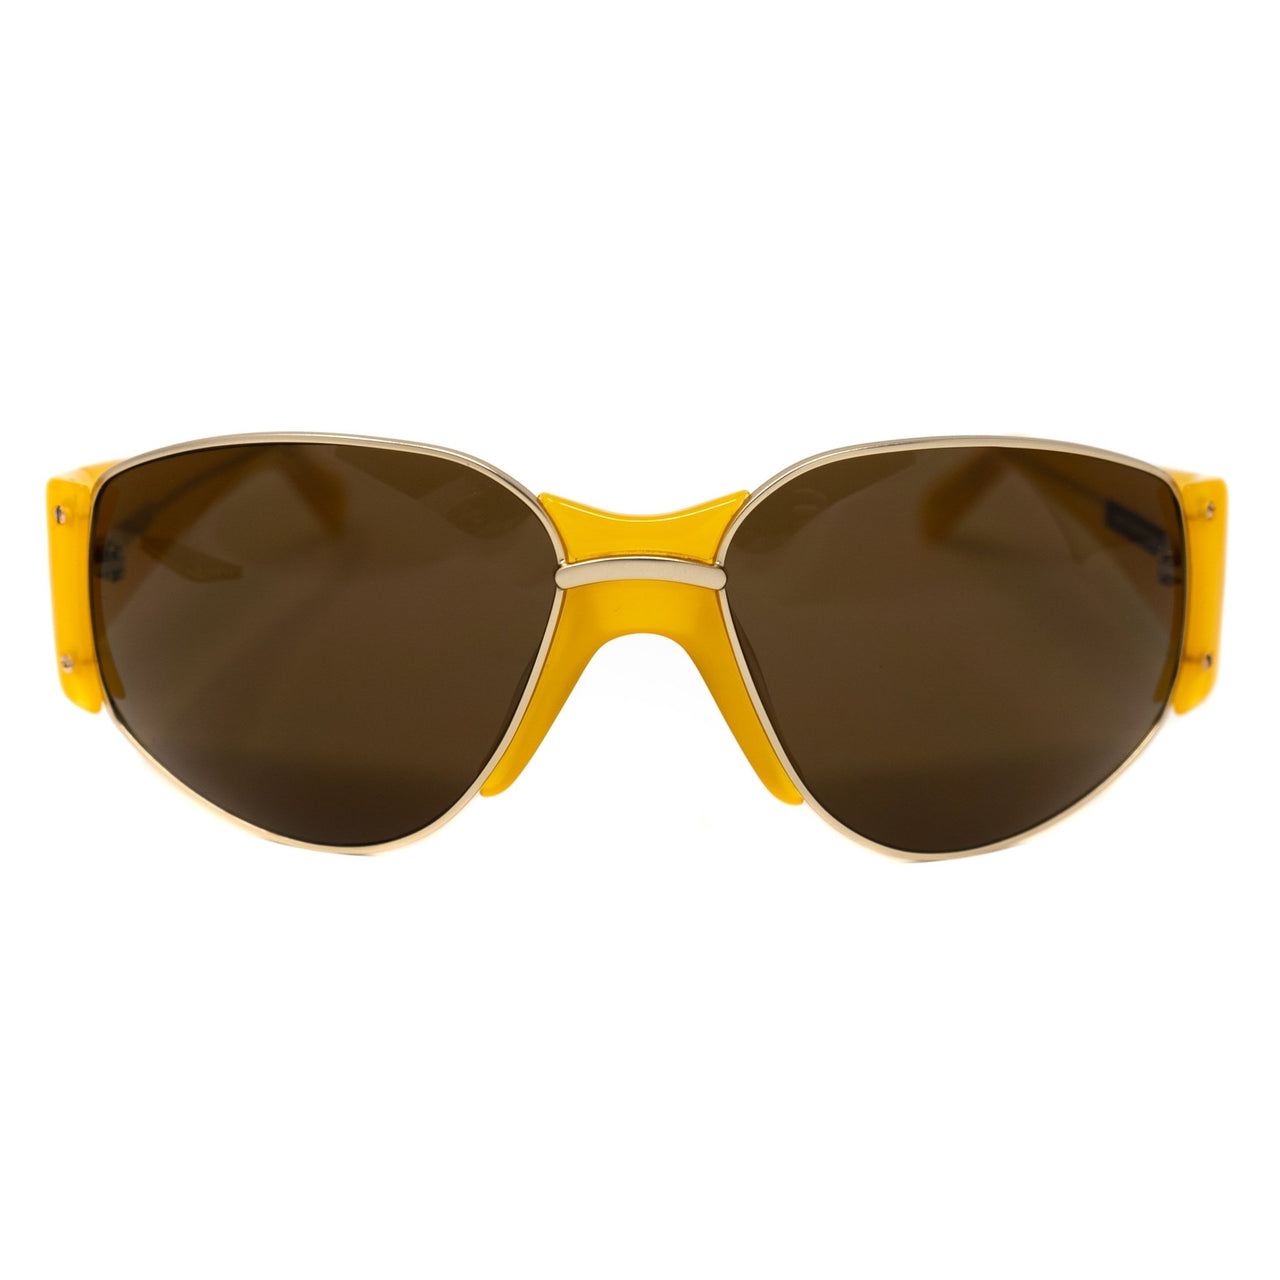 Eley Kishimoto Sunglasses Oversized Mustard Gold With Brown Lenses 5EKC1 - Watches & Crystals